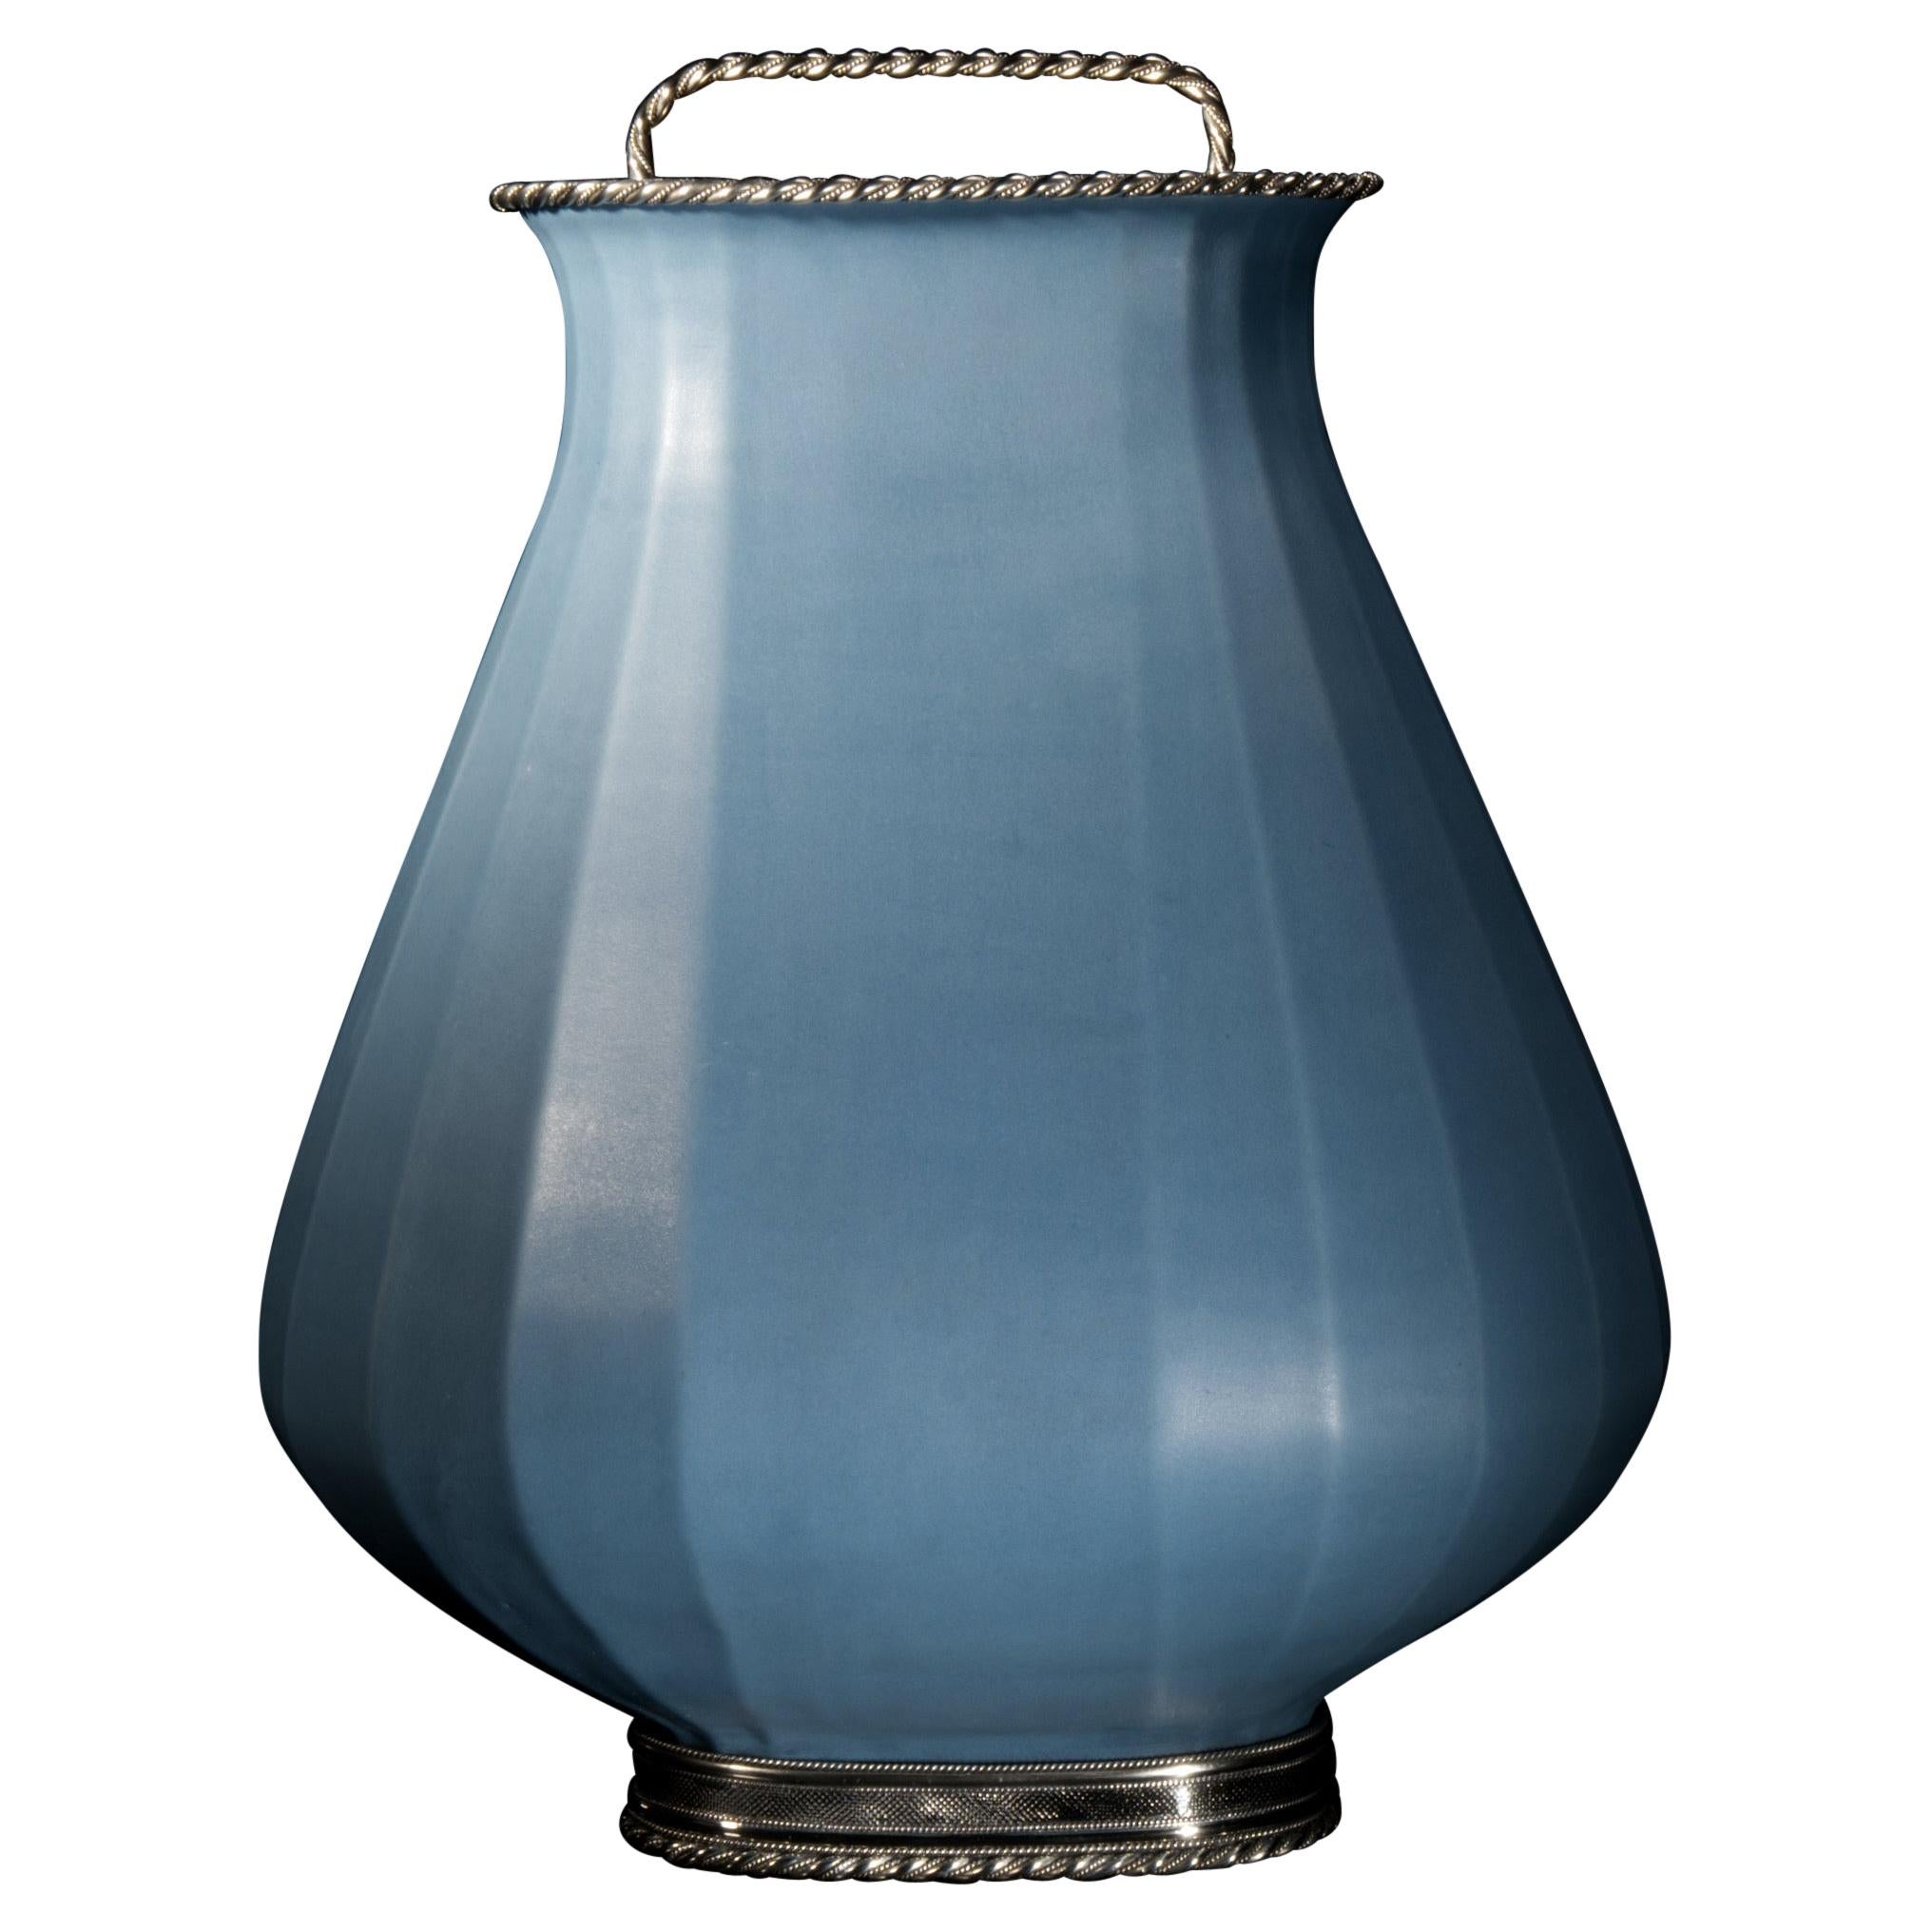 Blue Oval Jar by Estudio Guerrero Made with Glazed Ceramic and White Metal For Sale